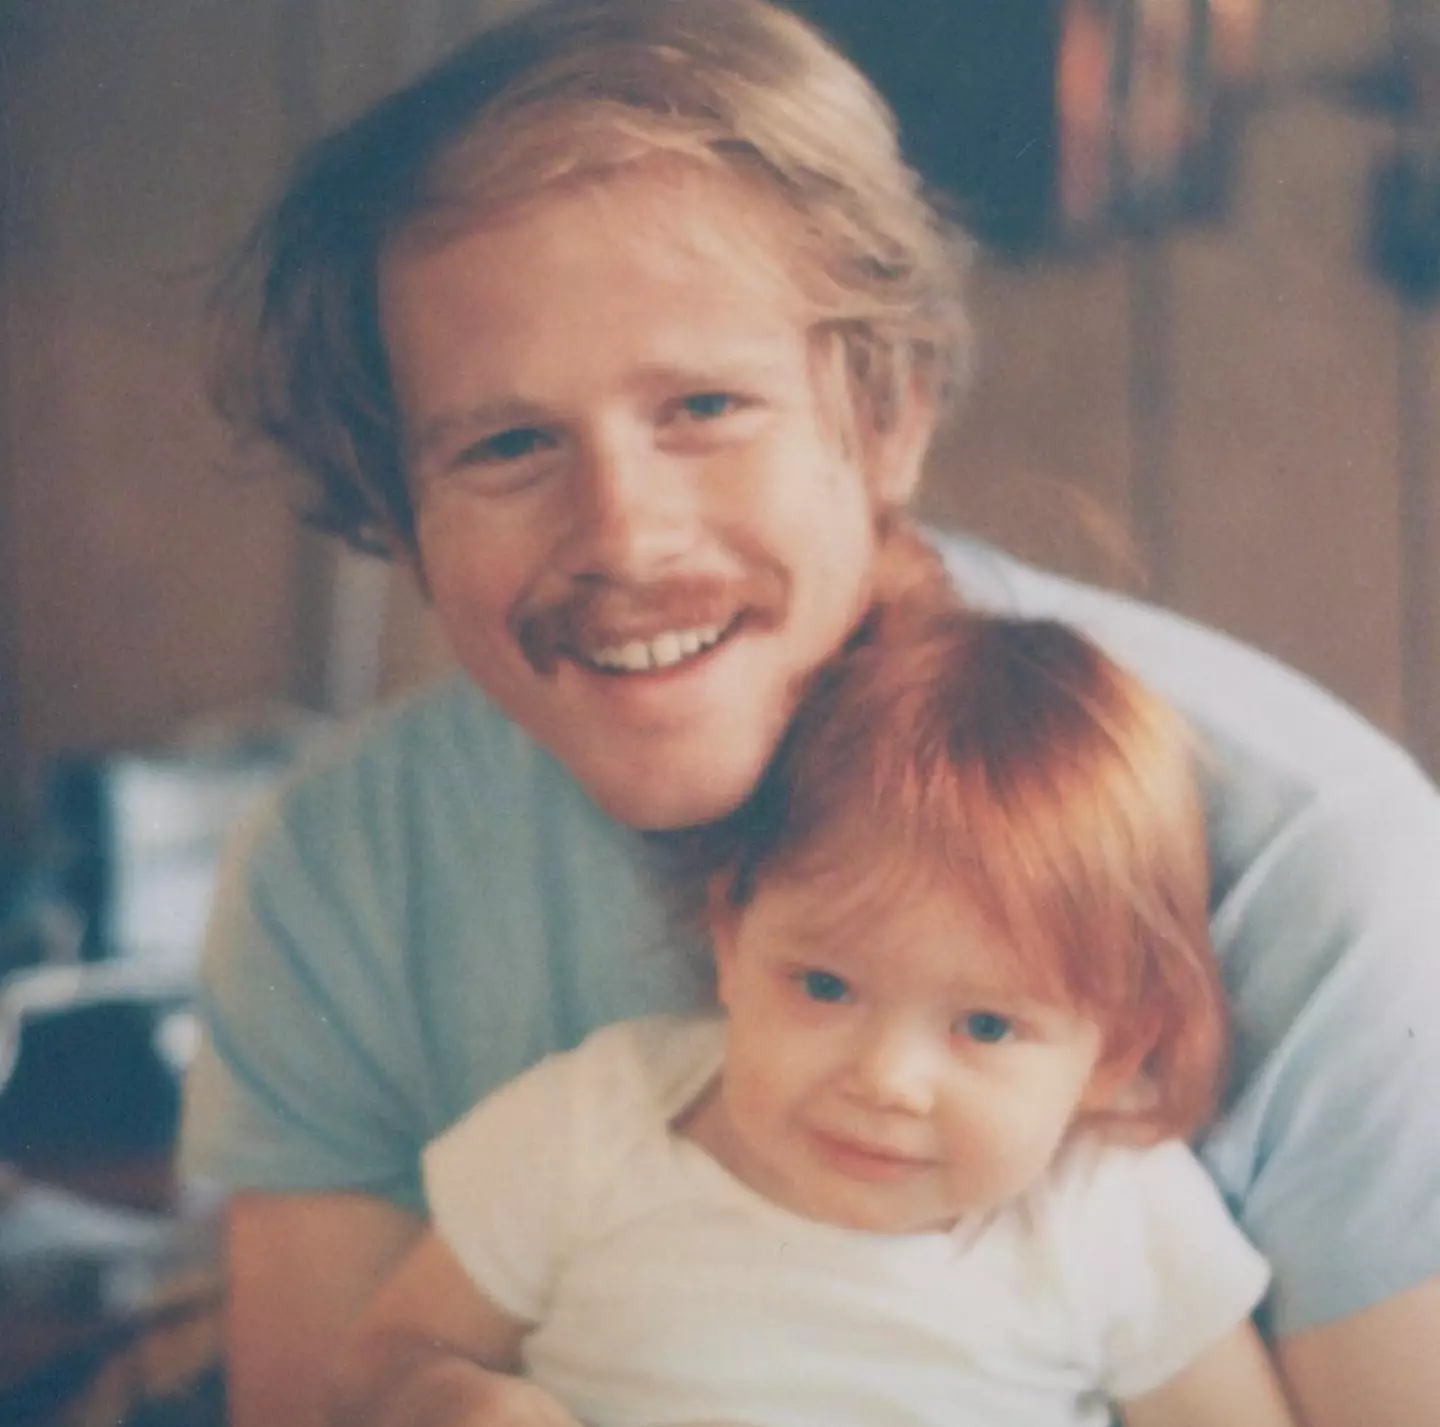 Bryce Dallas Howard with her famous dad Ron Howard.